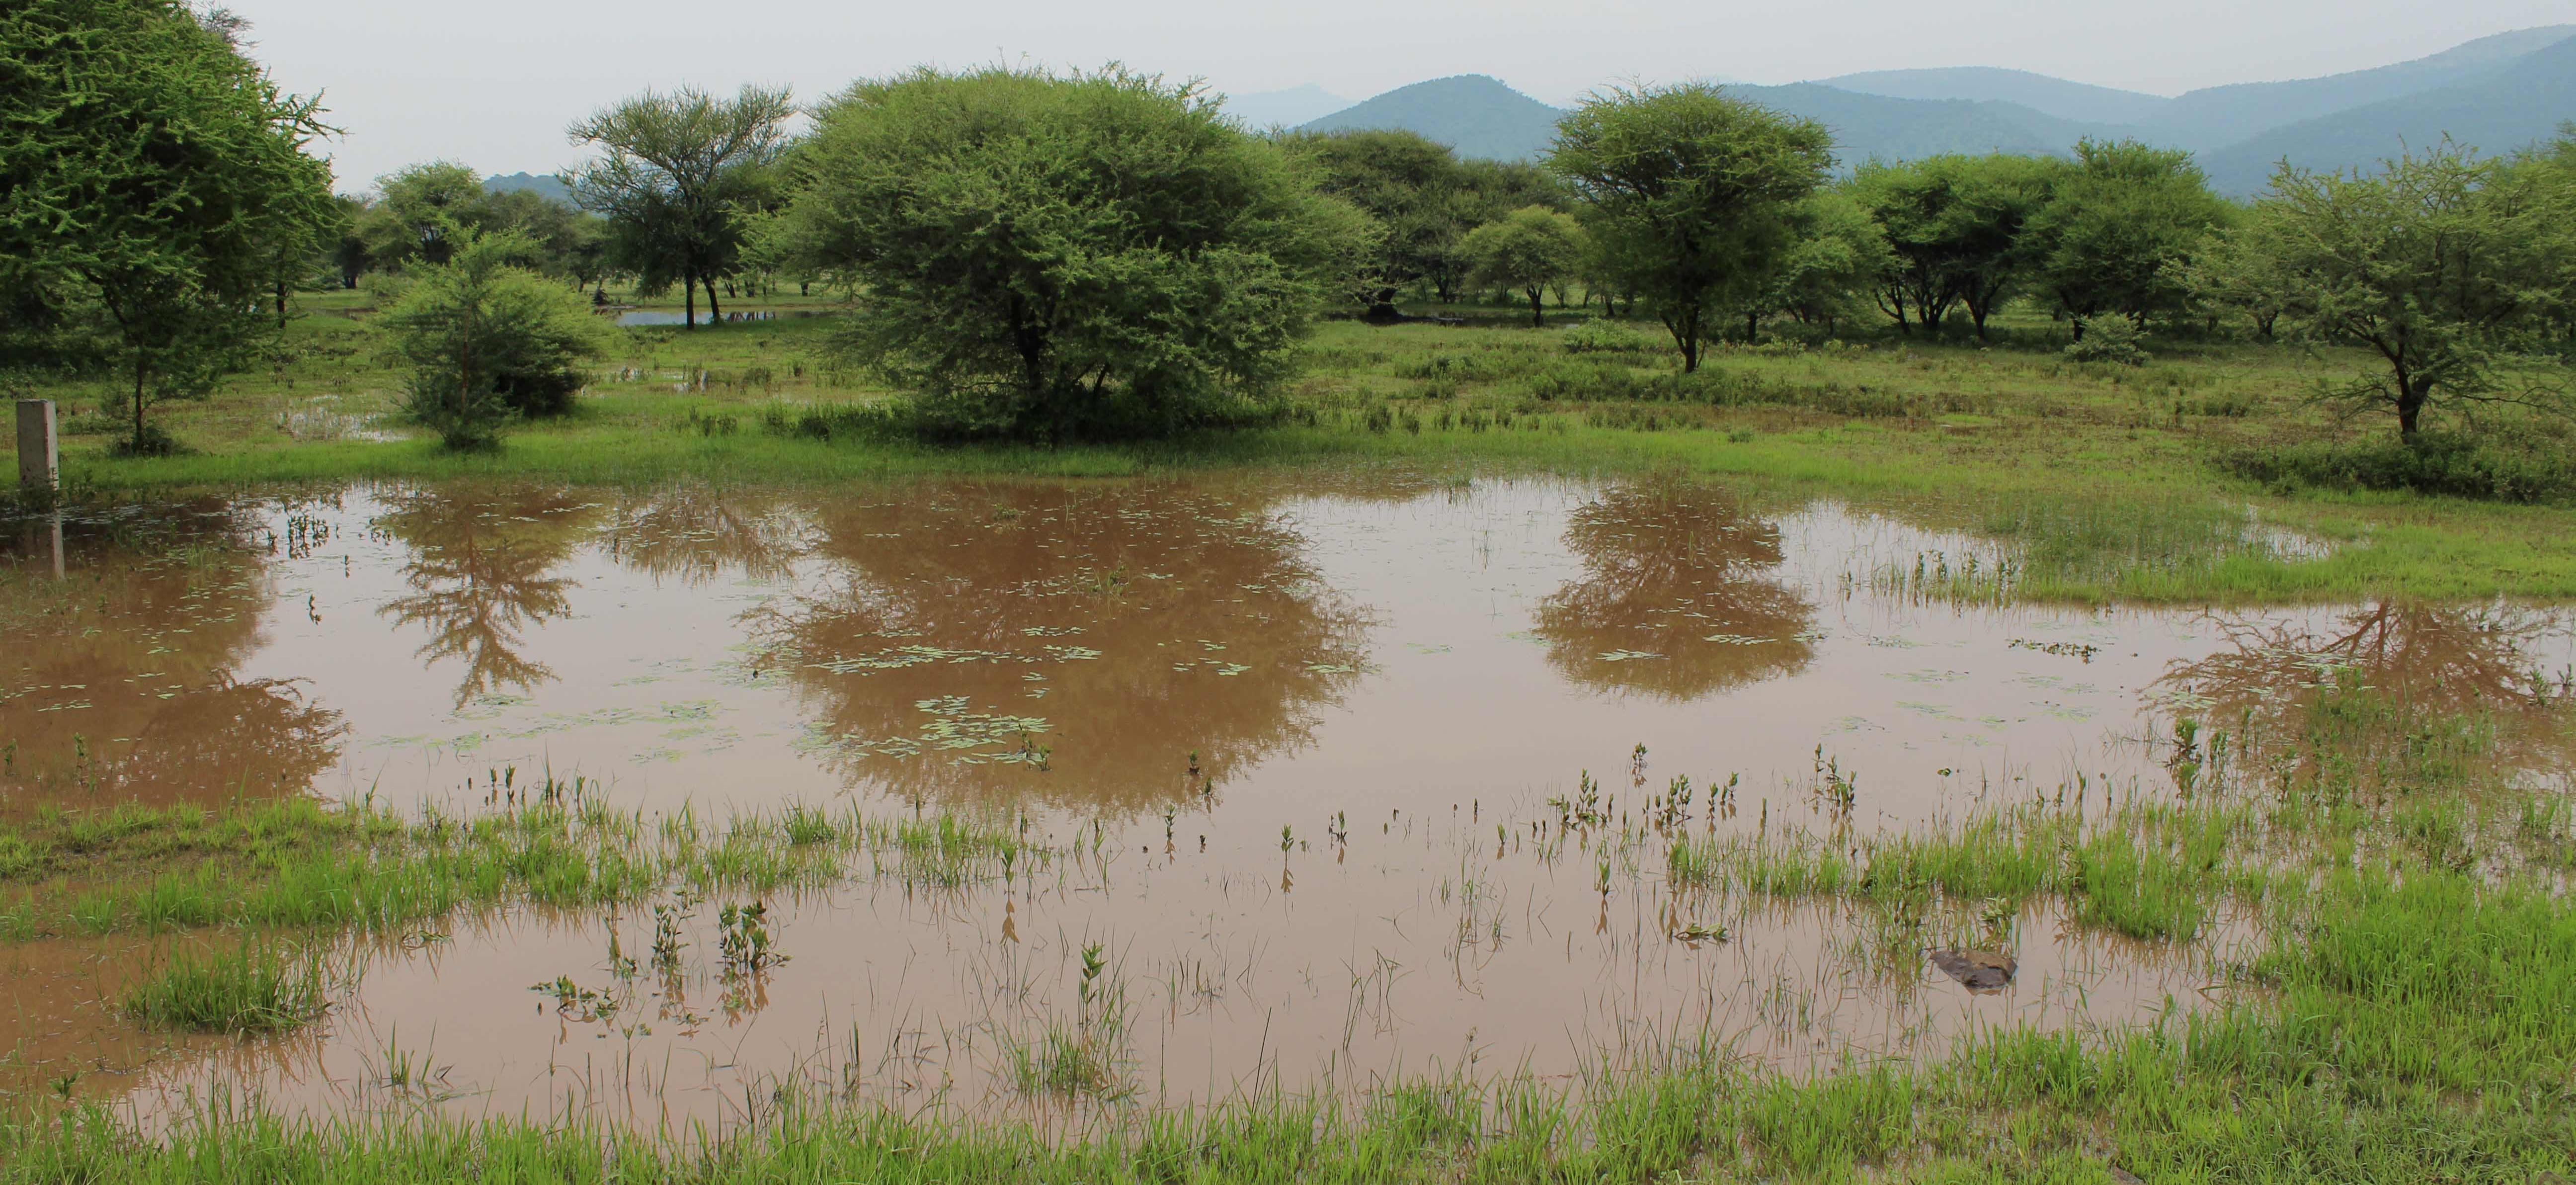 A tree-covered area flooded with muddy water in Tanzania